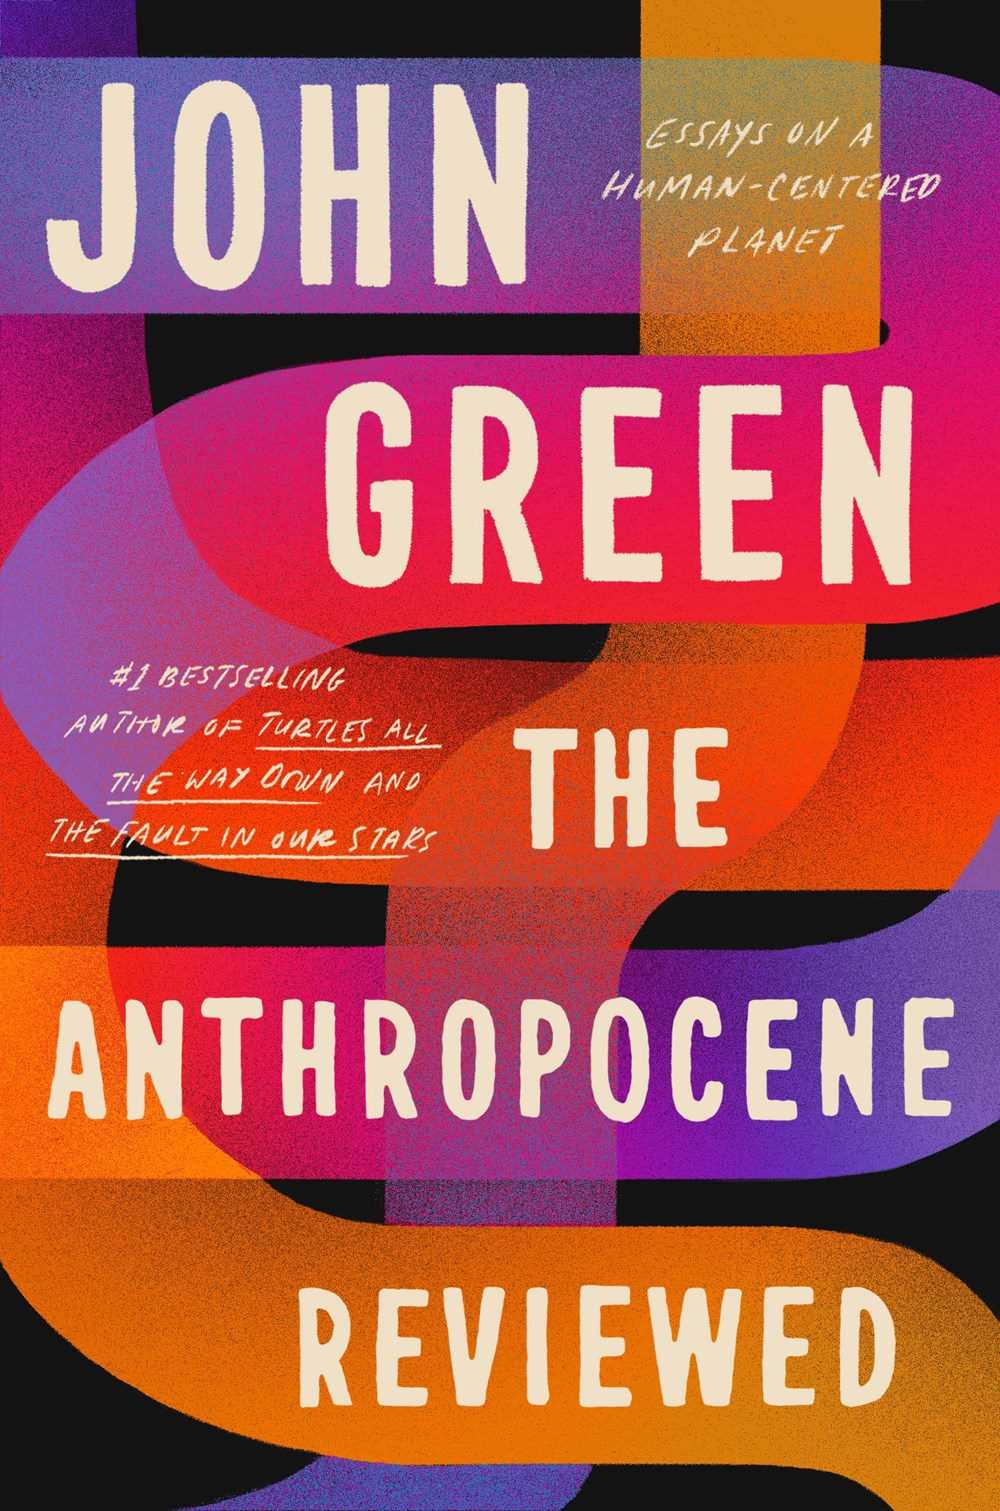 The cover of The Anthropocene Reviewed by John Green